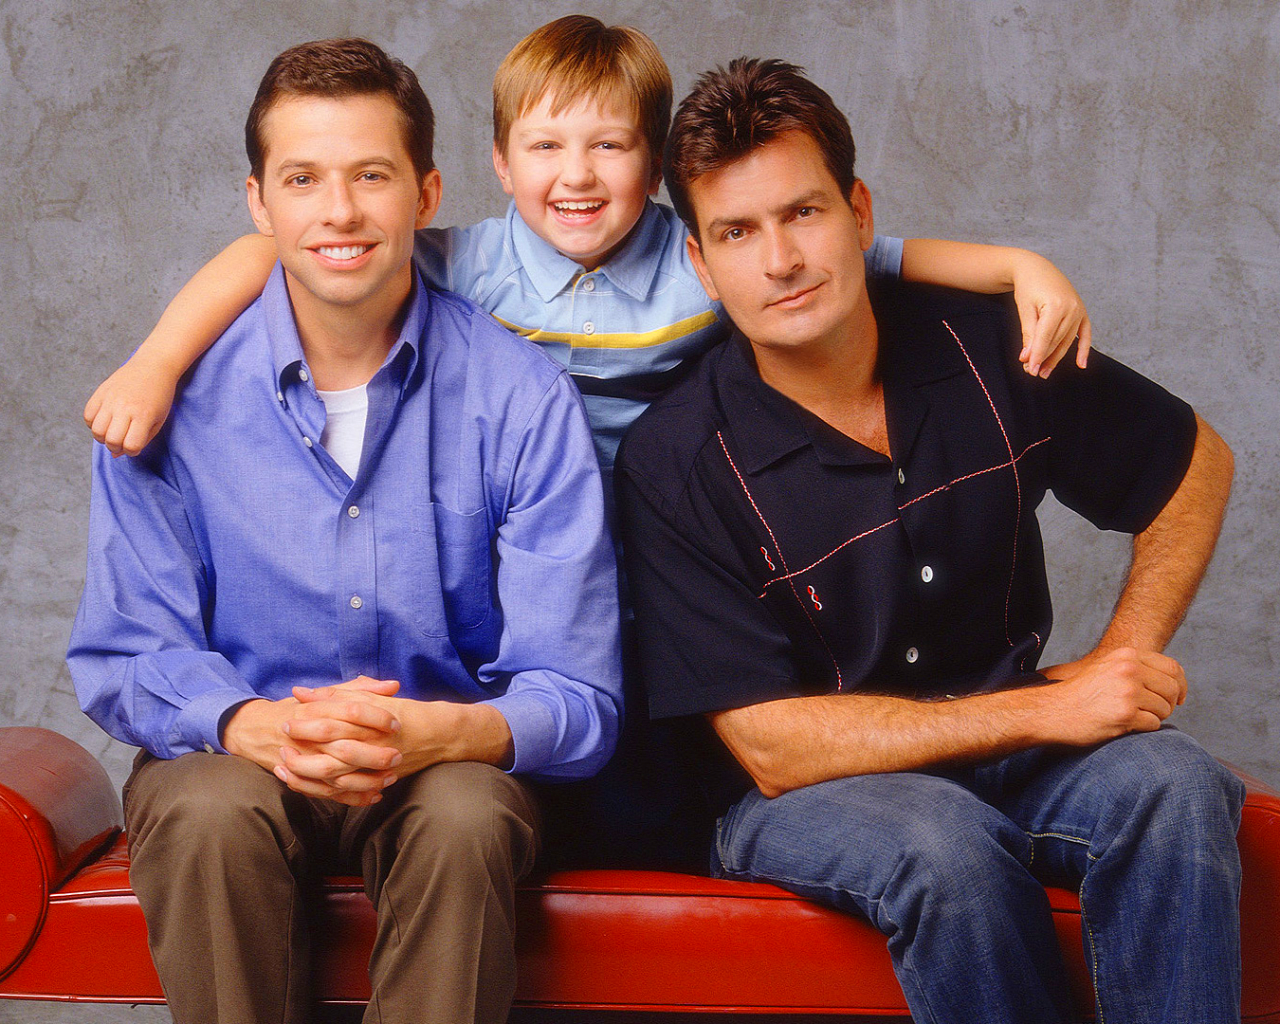 Two and a Half Men Wallpaper: Two and a Half Men.